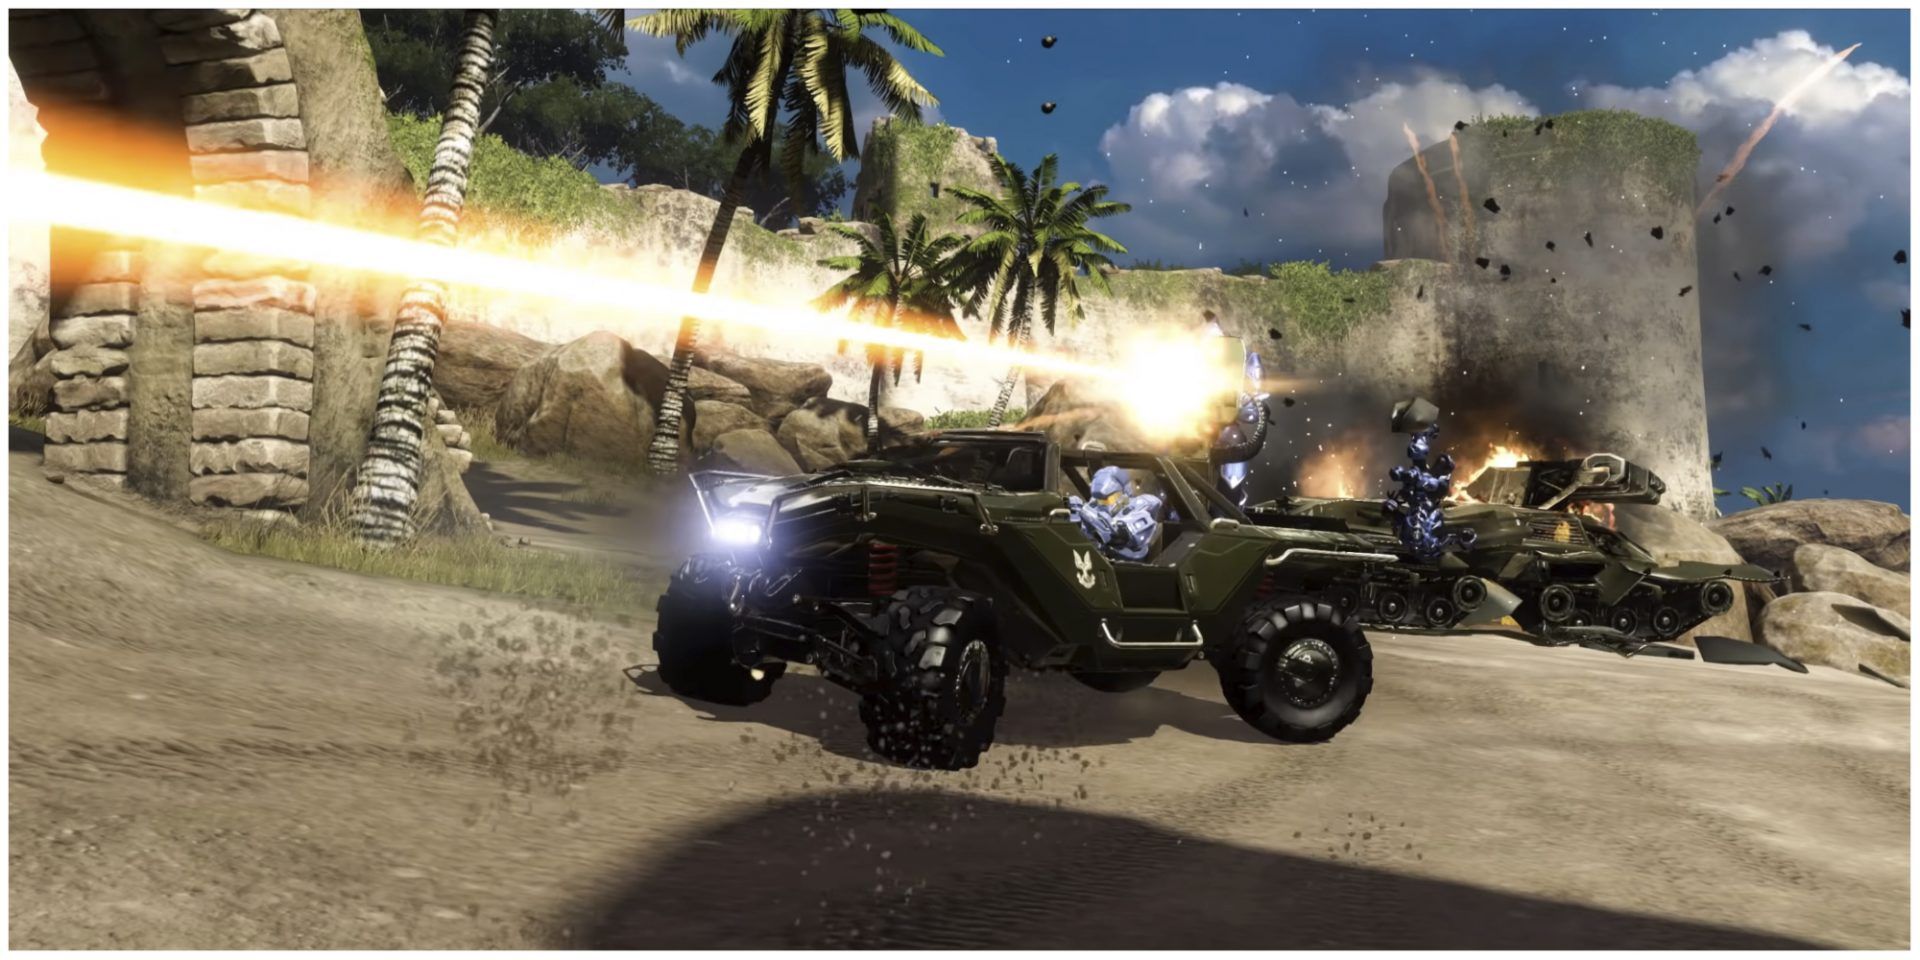 Halo The Master Chief Collection Multiplayer Gameplay Warthog and Tank On A Beach.